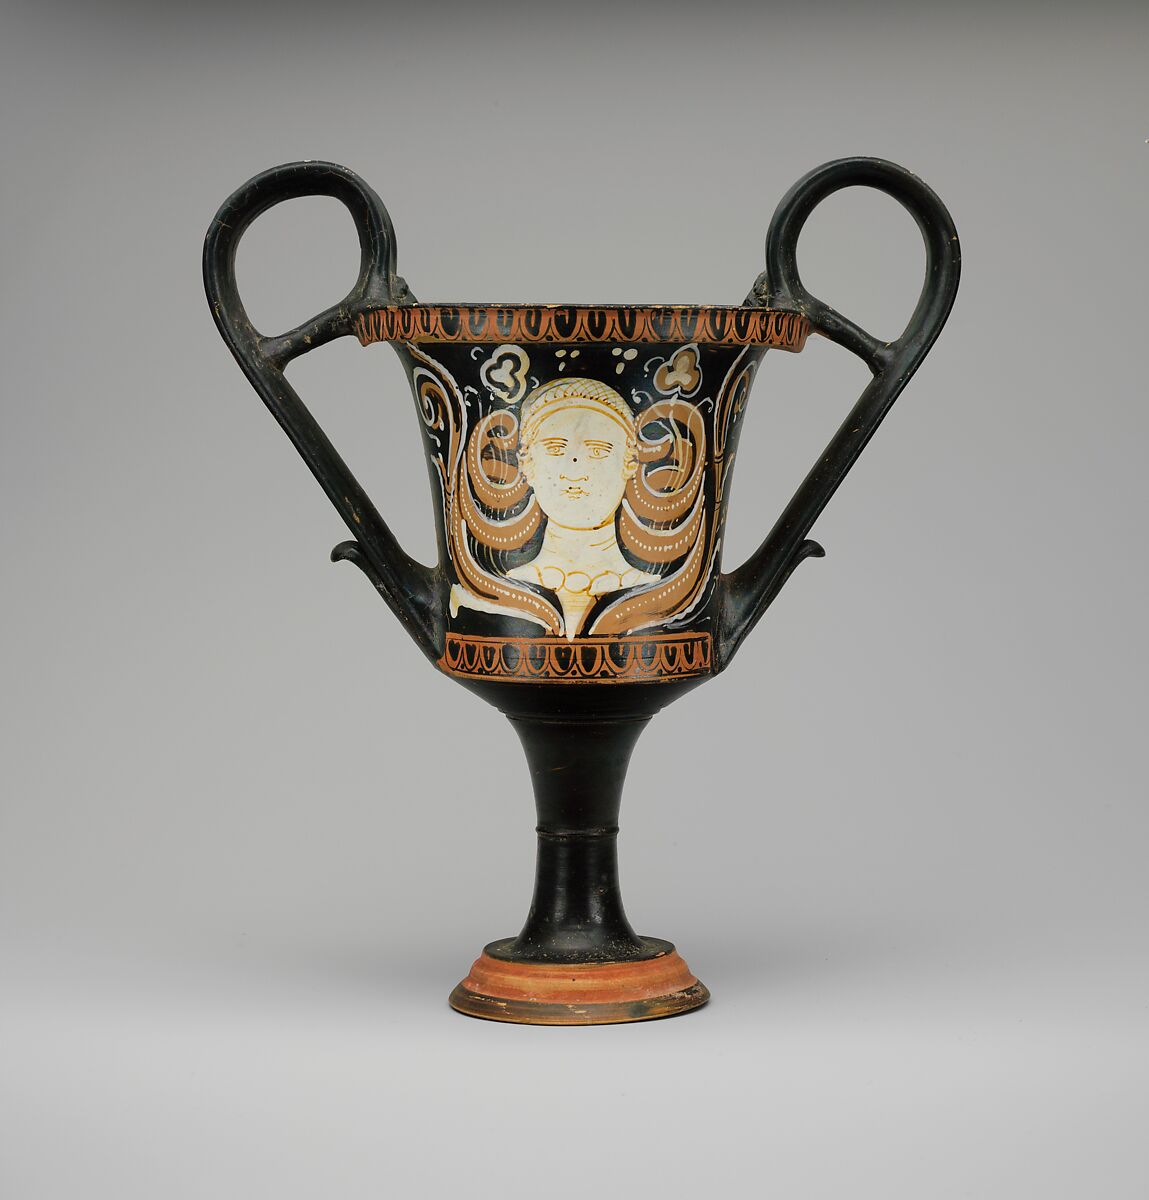 Terracotta kantharos (drinking cup with high handles)